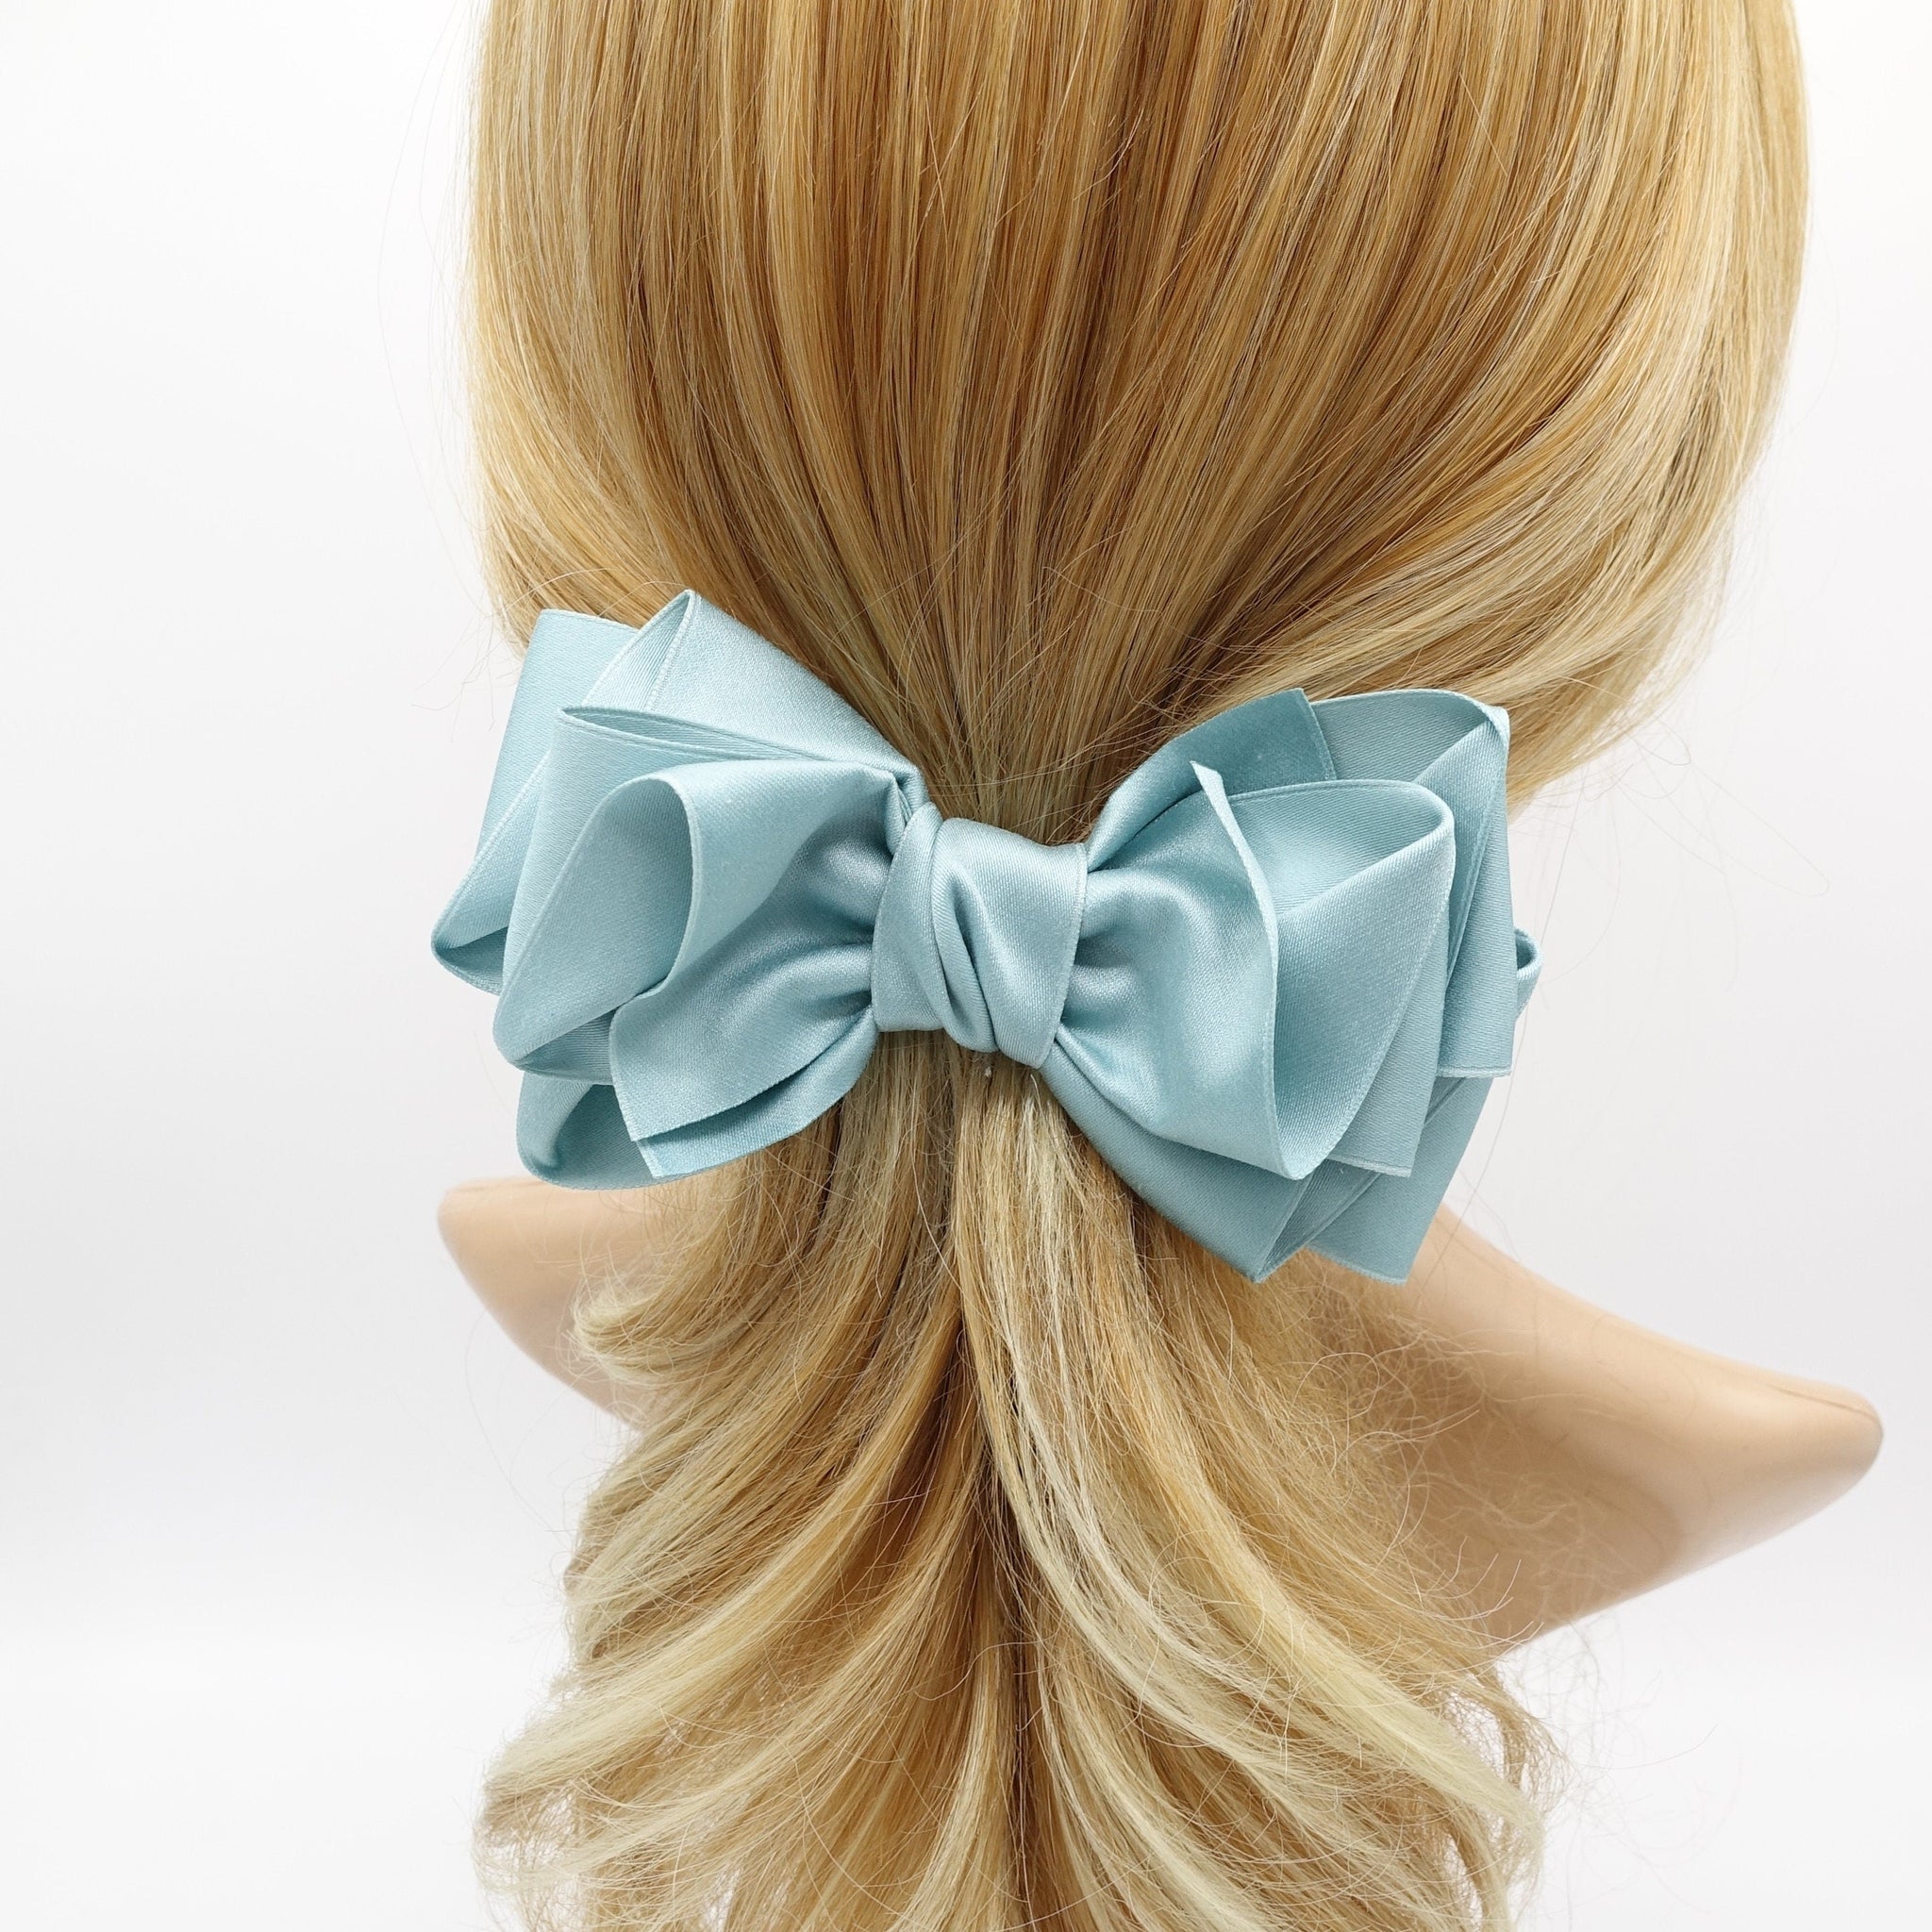 VeryShine claw/banana/barrette Mint VeryShine folded and layered hair bow normal size hair accessory for women